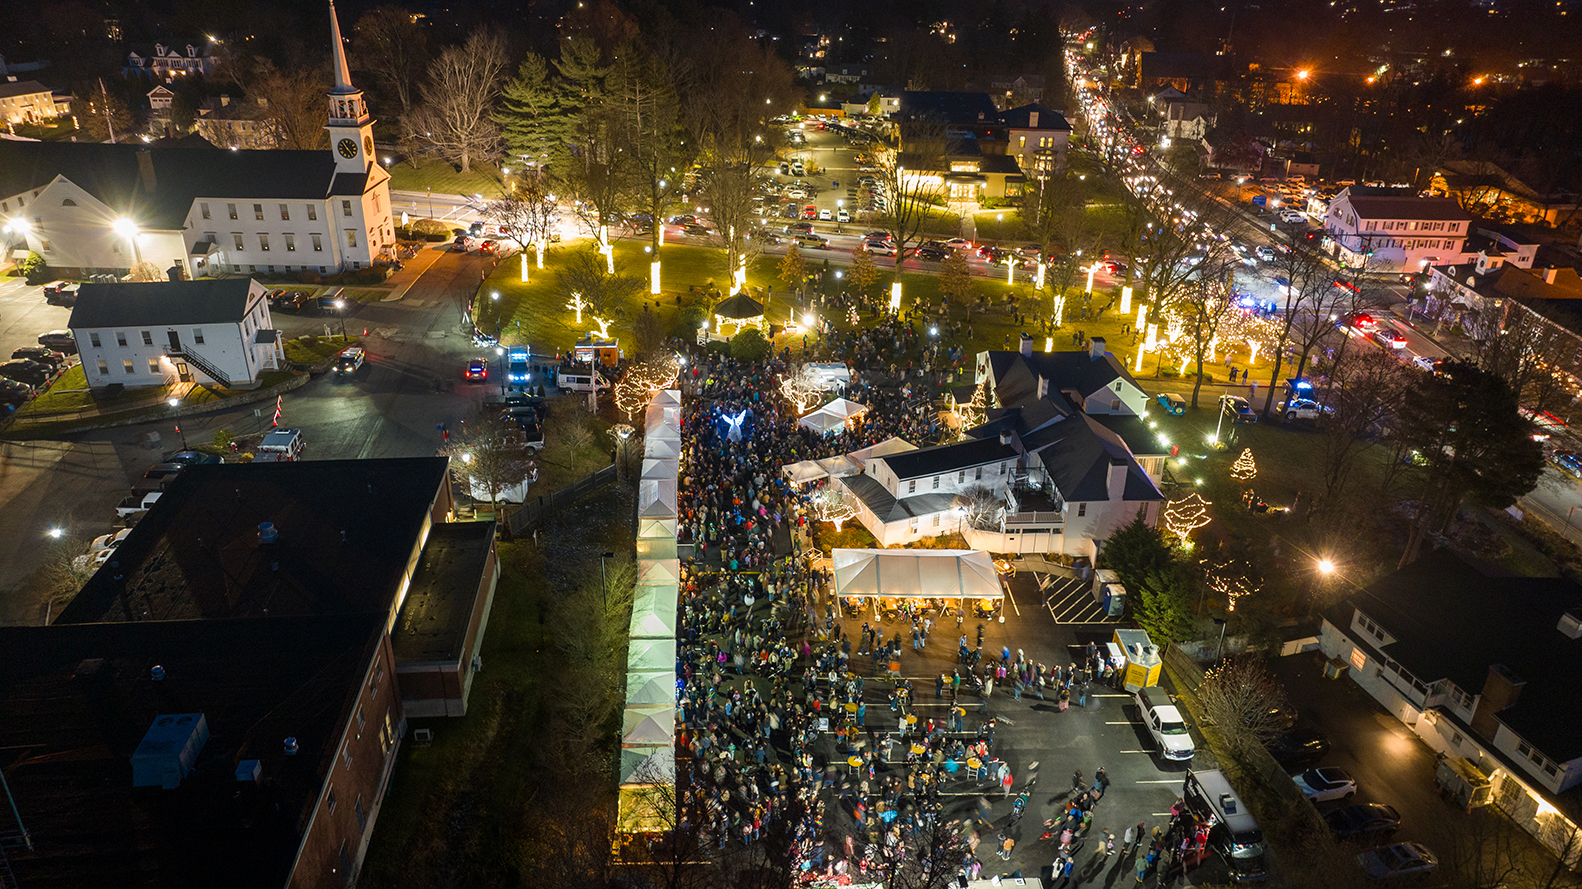 Shrewsbury rings in holidays with Yuletide Market, Light the Common